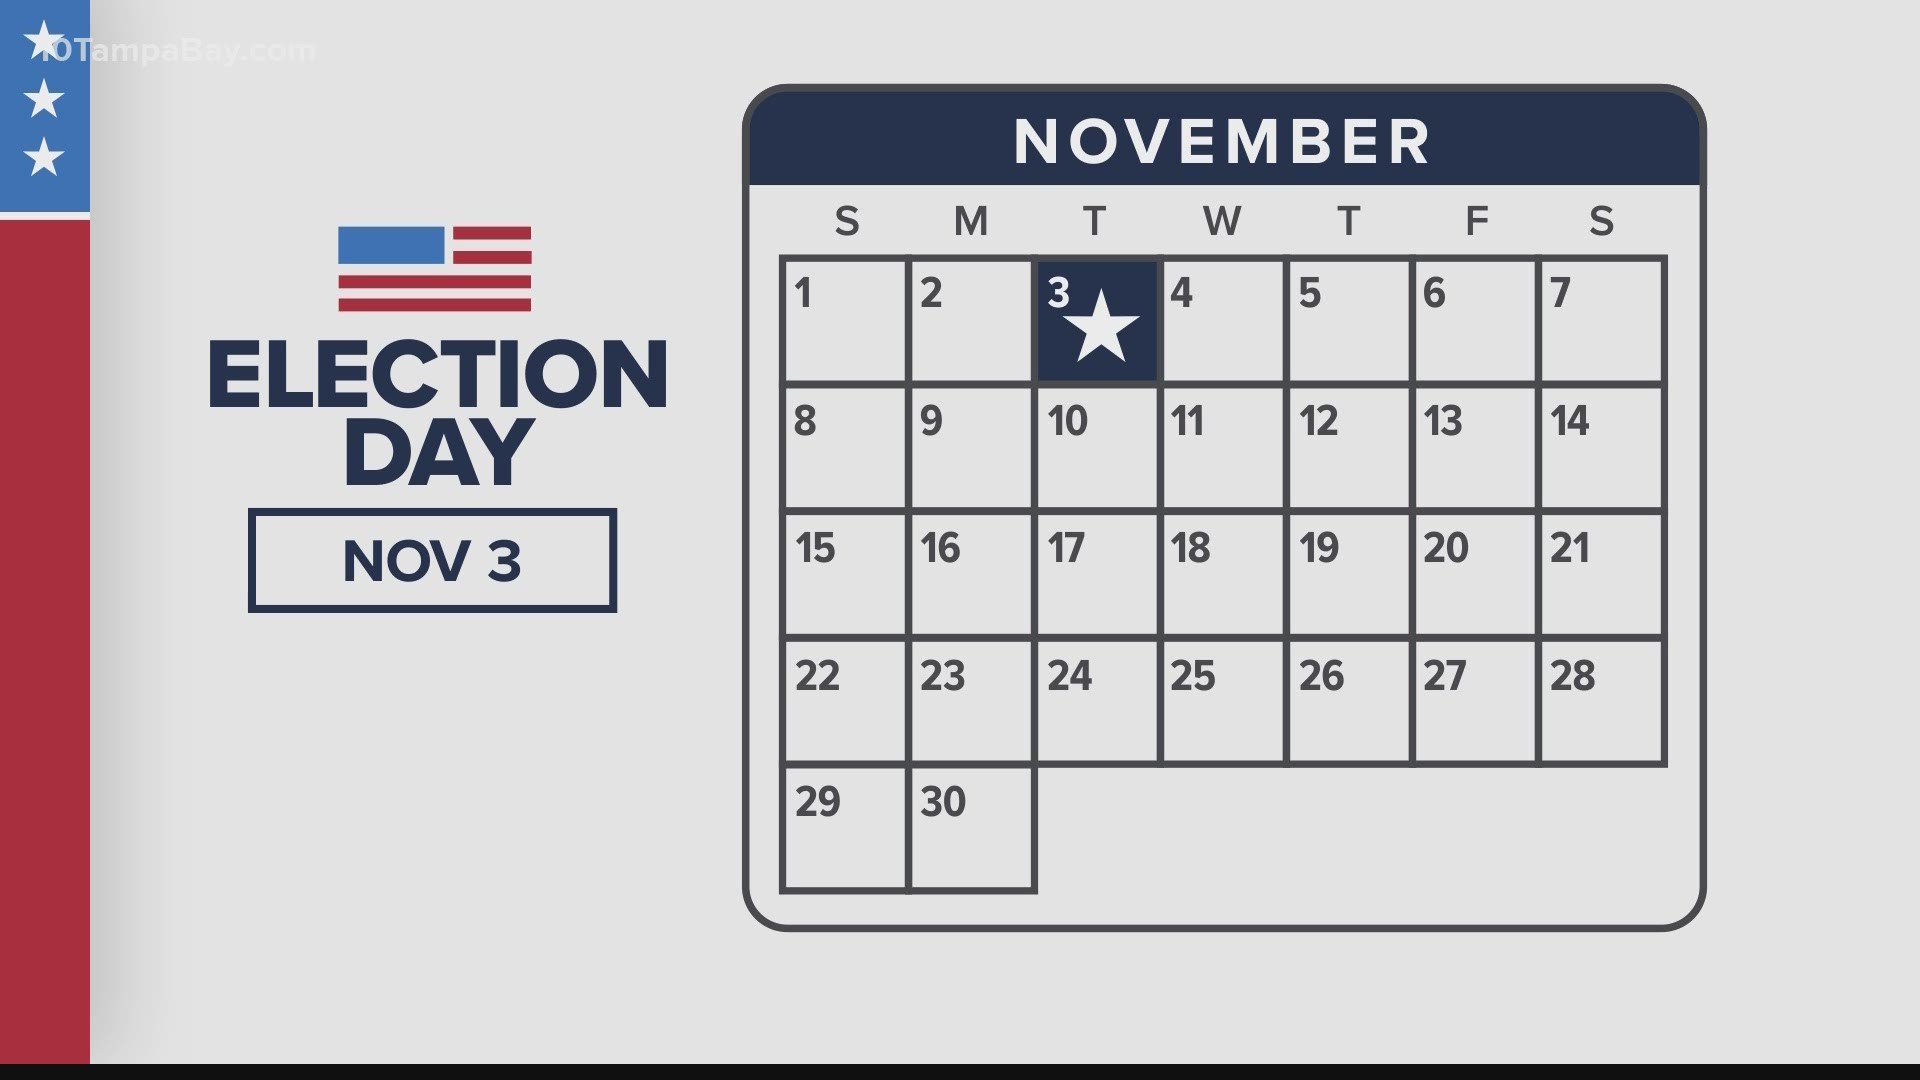 There are a few dates you should add to your calendar now to make sure your vote is counted in November.